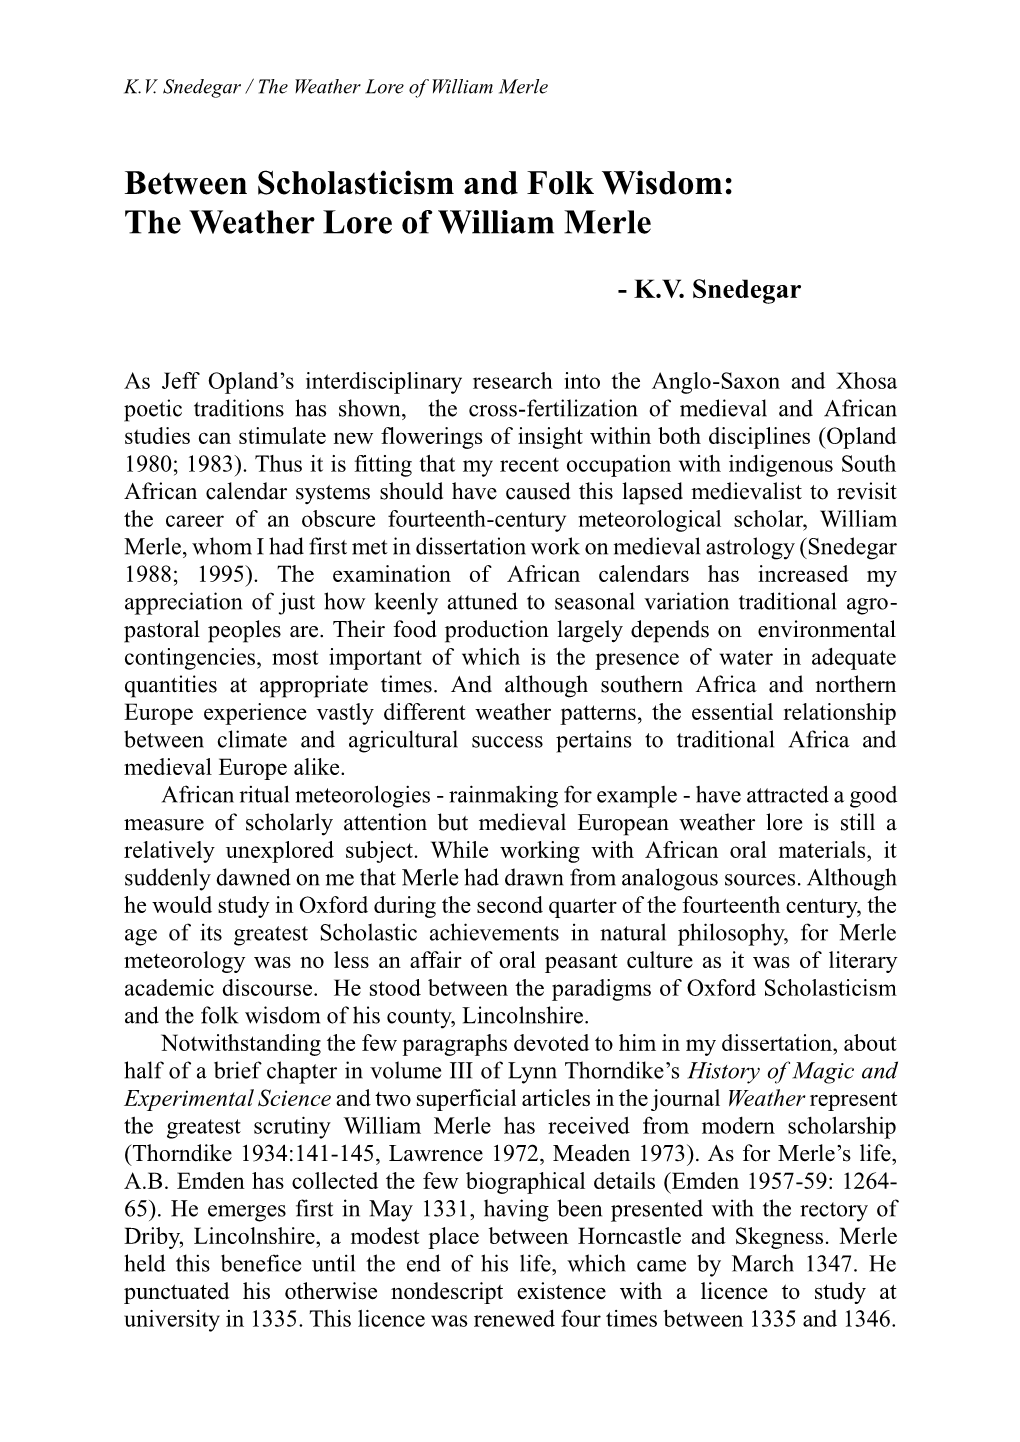 The Weather Lore of William Merle